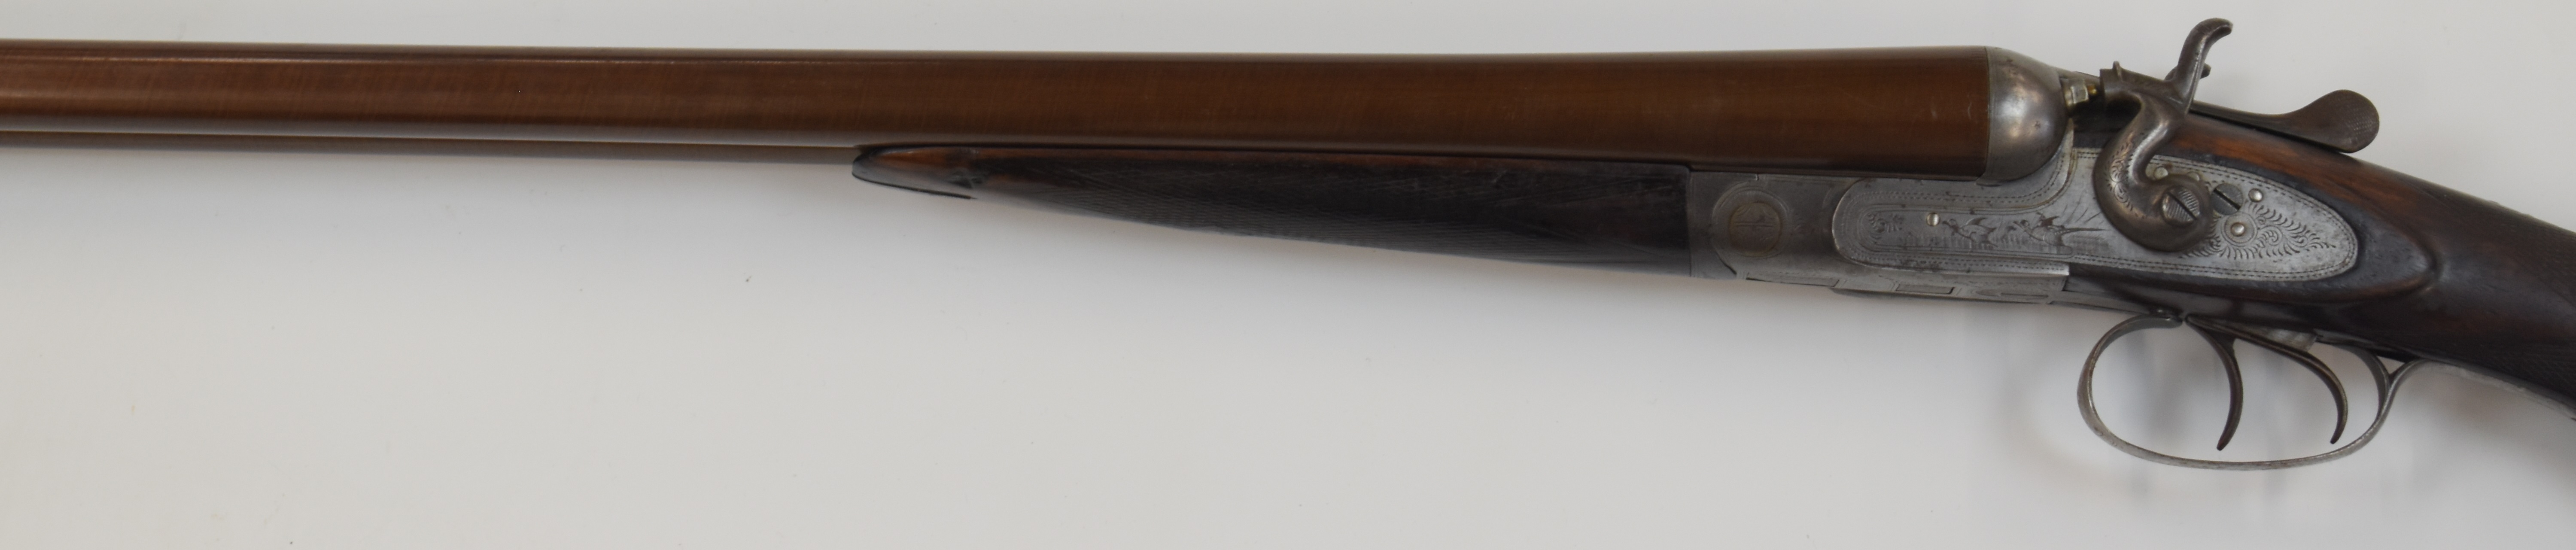 Skimin & Wood 12 bore side by side hammer action shotgun with engraved scenes of birds to the locks, - Image 8 of 12